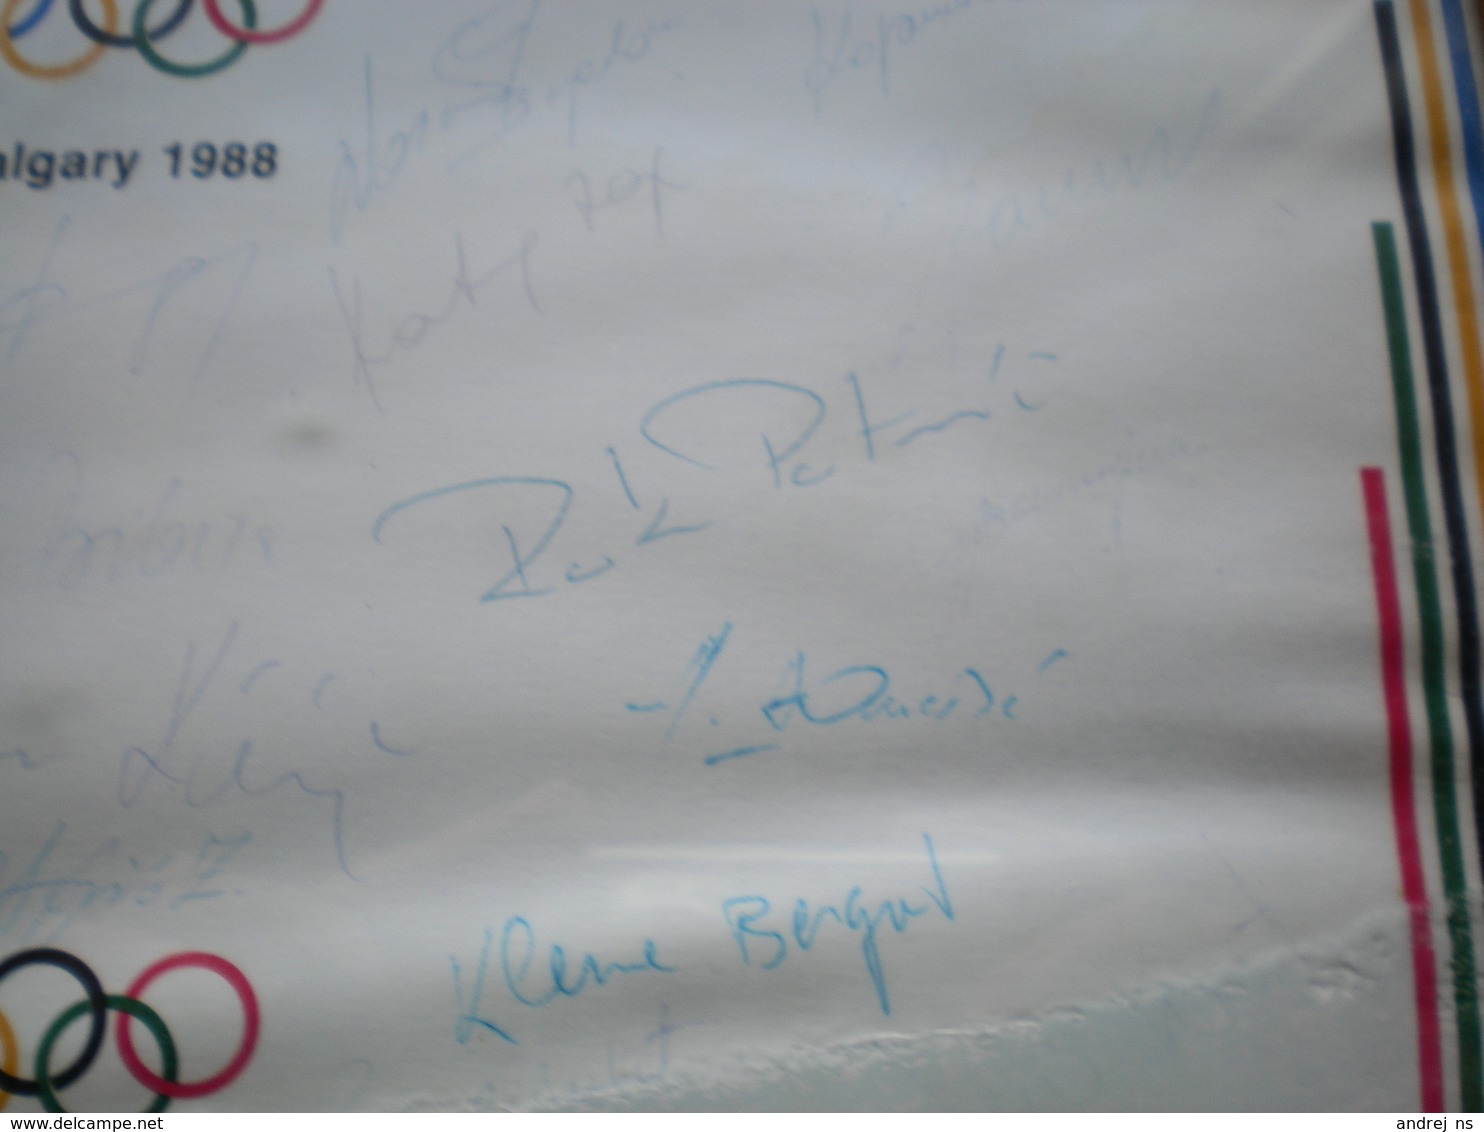 Signatures Authographs Calgary 1988 Yugoslav Olympic Team Sends You Many Greetings From The Plympic Winter Games - Autographes